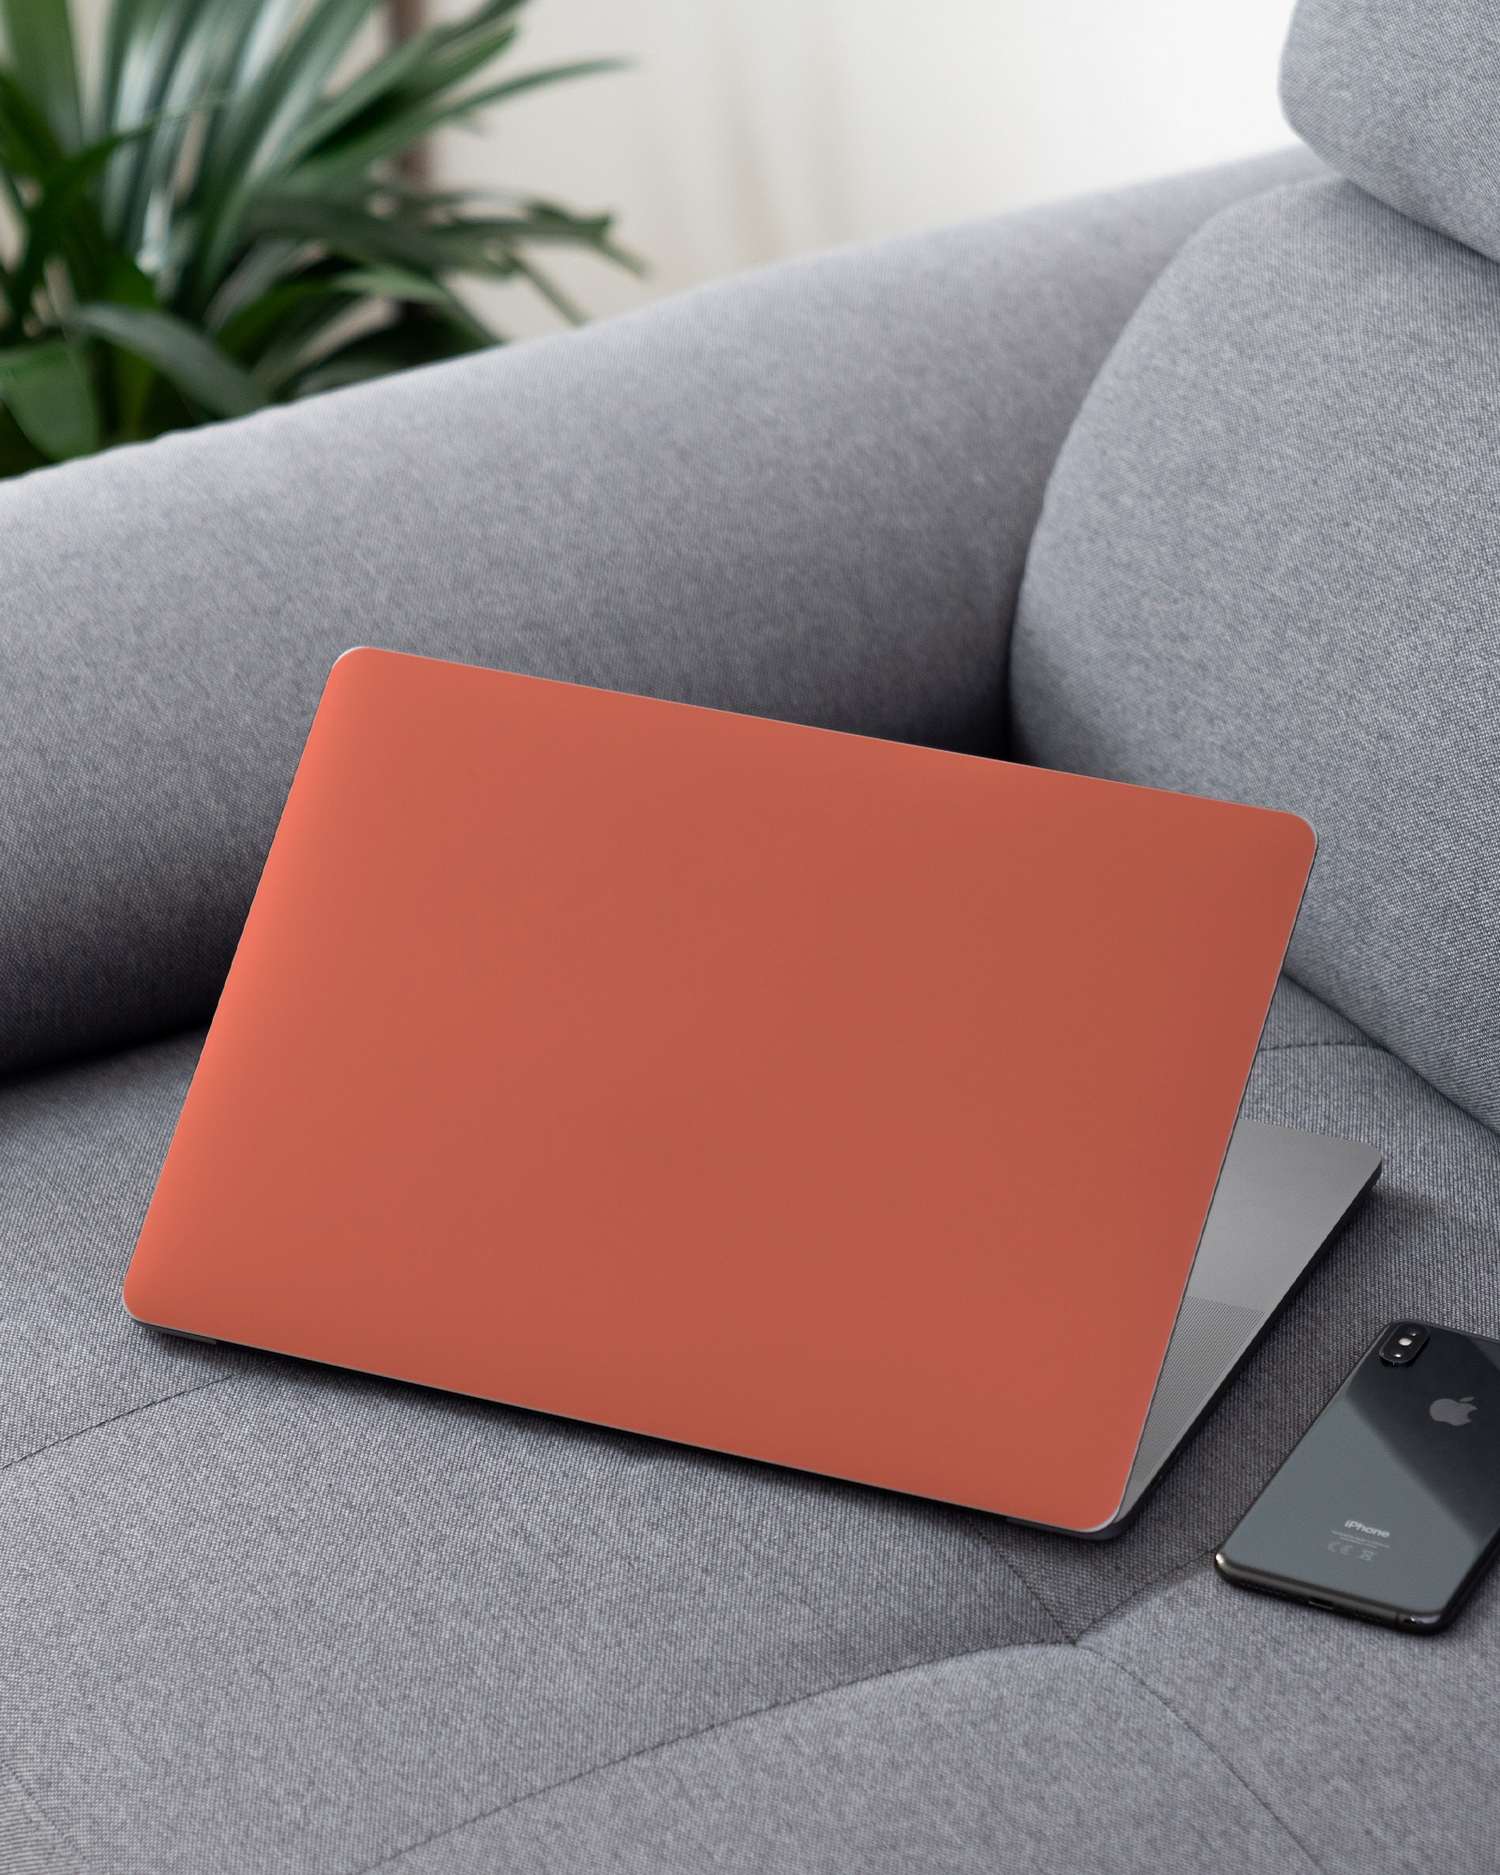 DEEP CORAL Laptop Skin for 13 inch Apple MacBooks on a couch